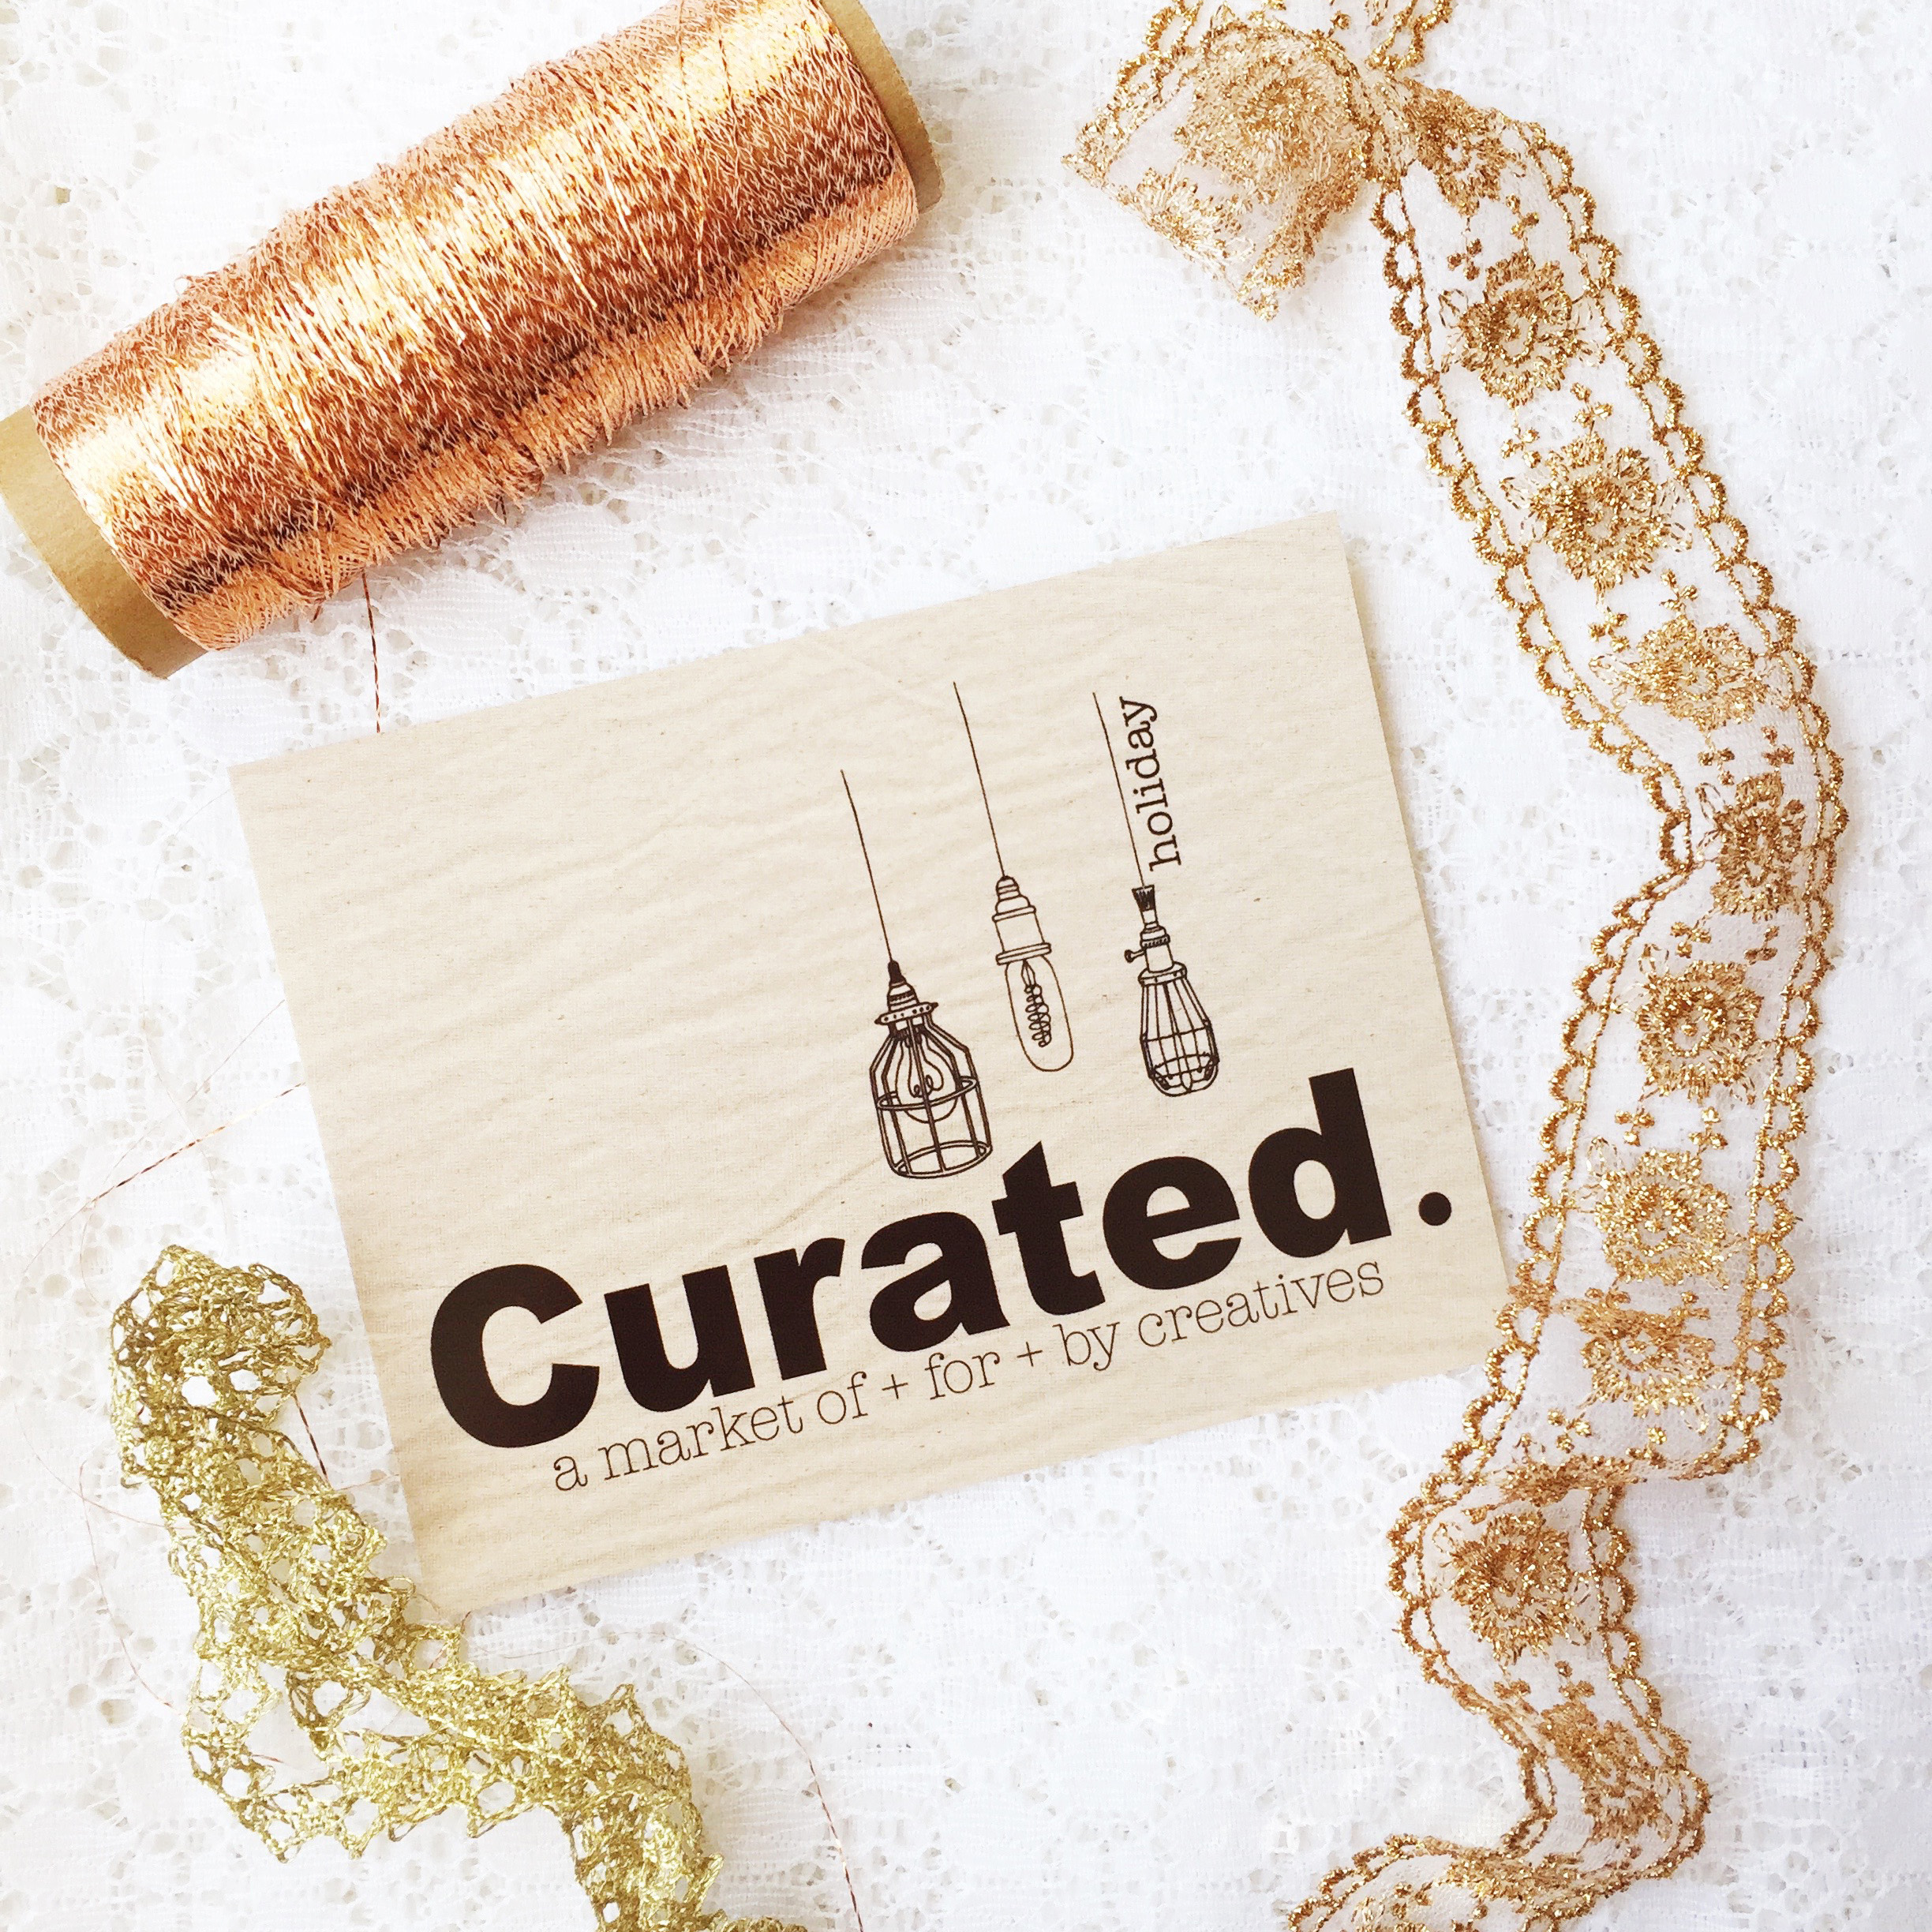 Curated. Holiday Market in Calgary Nov 18-19th